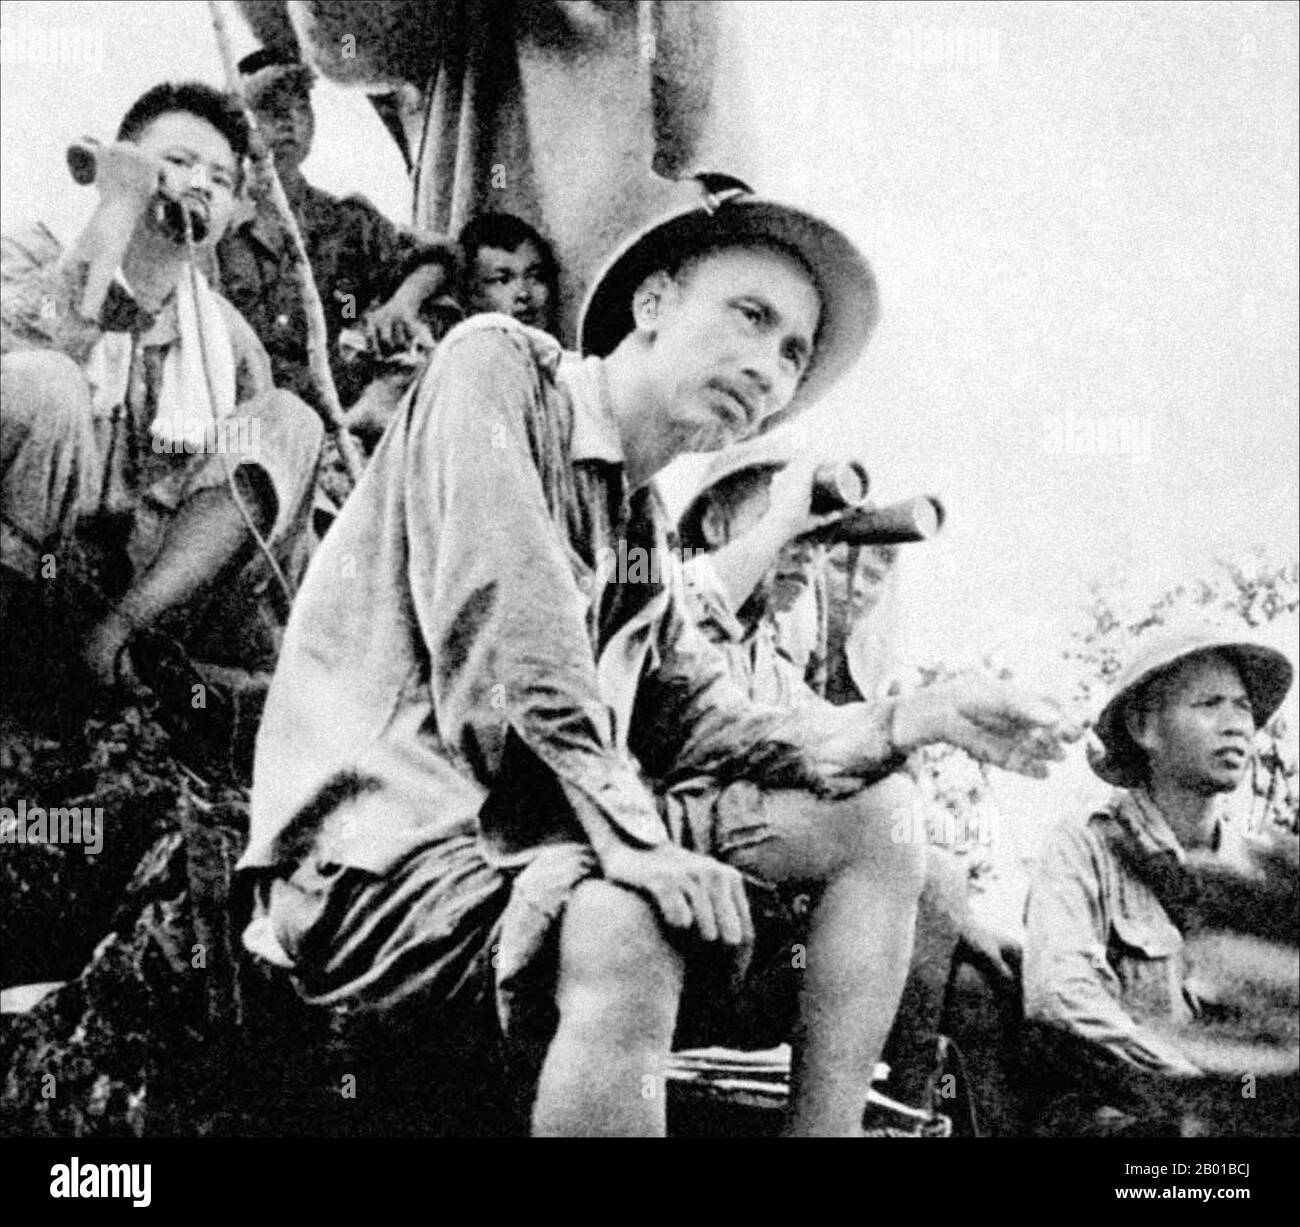 Vietnam: Ho Chi Minh at a military command post in northern Tonkin during the First Indochina War (1946-1954). Photo by Vu Nang An (15 May 1916 - 7 July 2004, out of copyright), 16 September 1950.  The First Indochina War (also known as the French Indochina War, Anti-French War, Franco-Vietnamese War, Franco-Vietminh War, Indochina War, Dirty War in France, and Anti-French Resistance War in contemporary Vietnam) was fought in French Indochina from December 19, 1946, until August 1, 1954, between the French Union's French Far East Expeditionary Corps against the Việt Minh, led by Hồ Chí Minh. Stock Photo